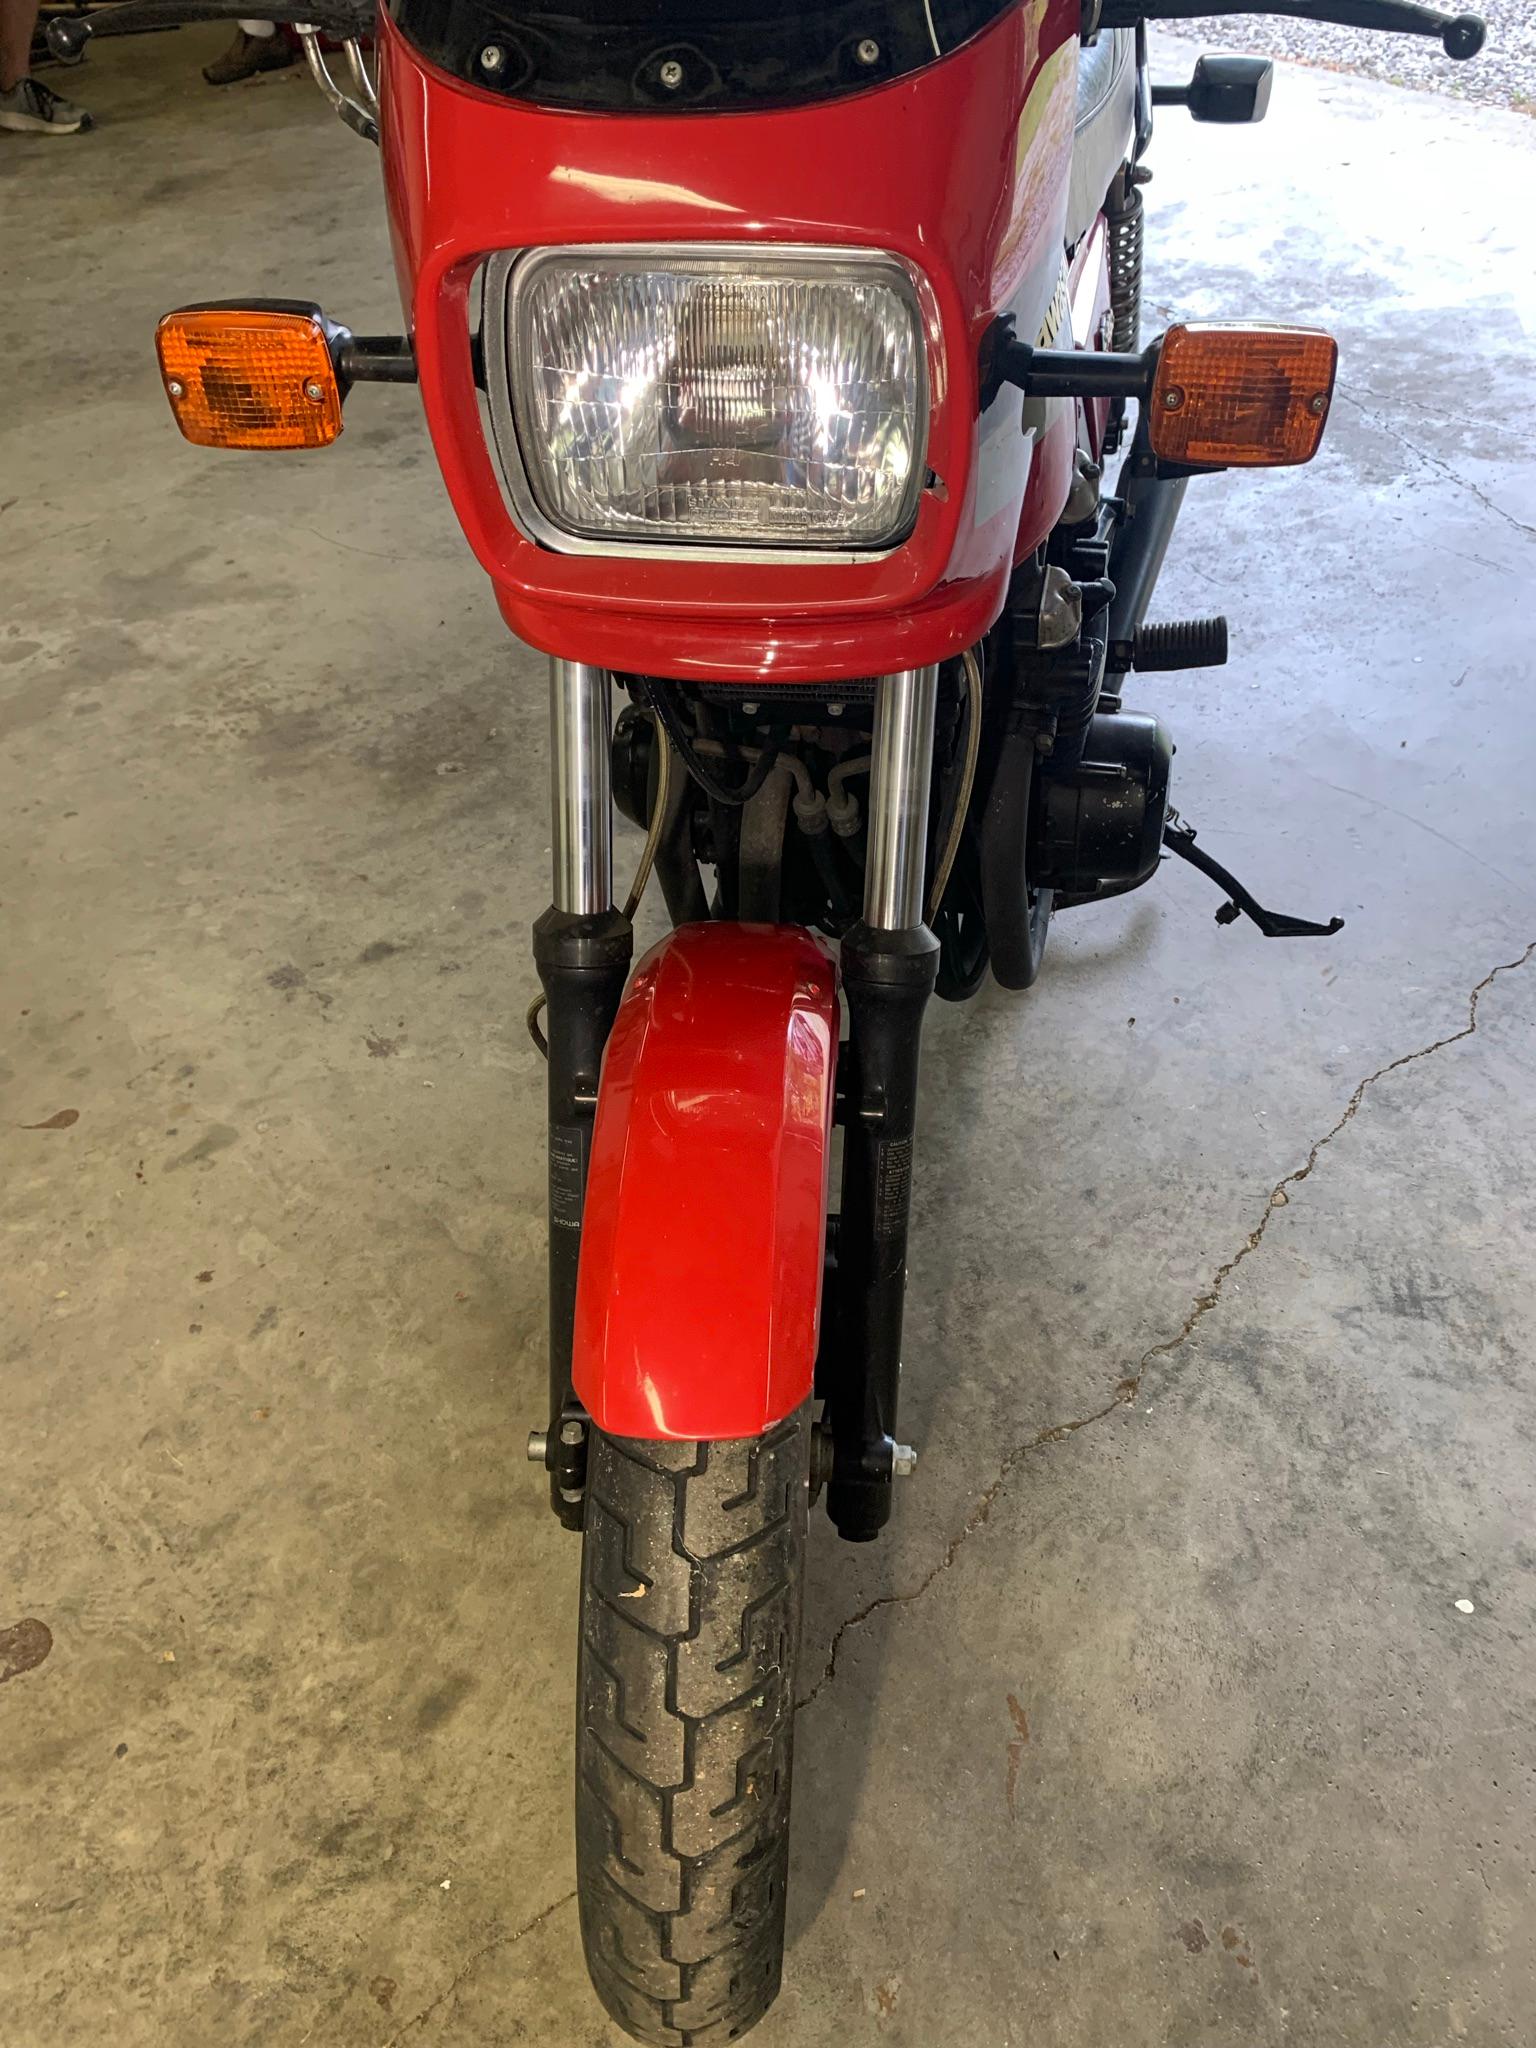 1981 Kawasaki GPZ 550 Motorcycle. 7,503 Miles.   Clean Title.  See Photos for Details